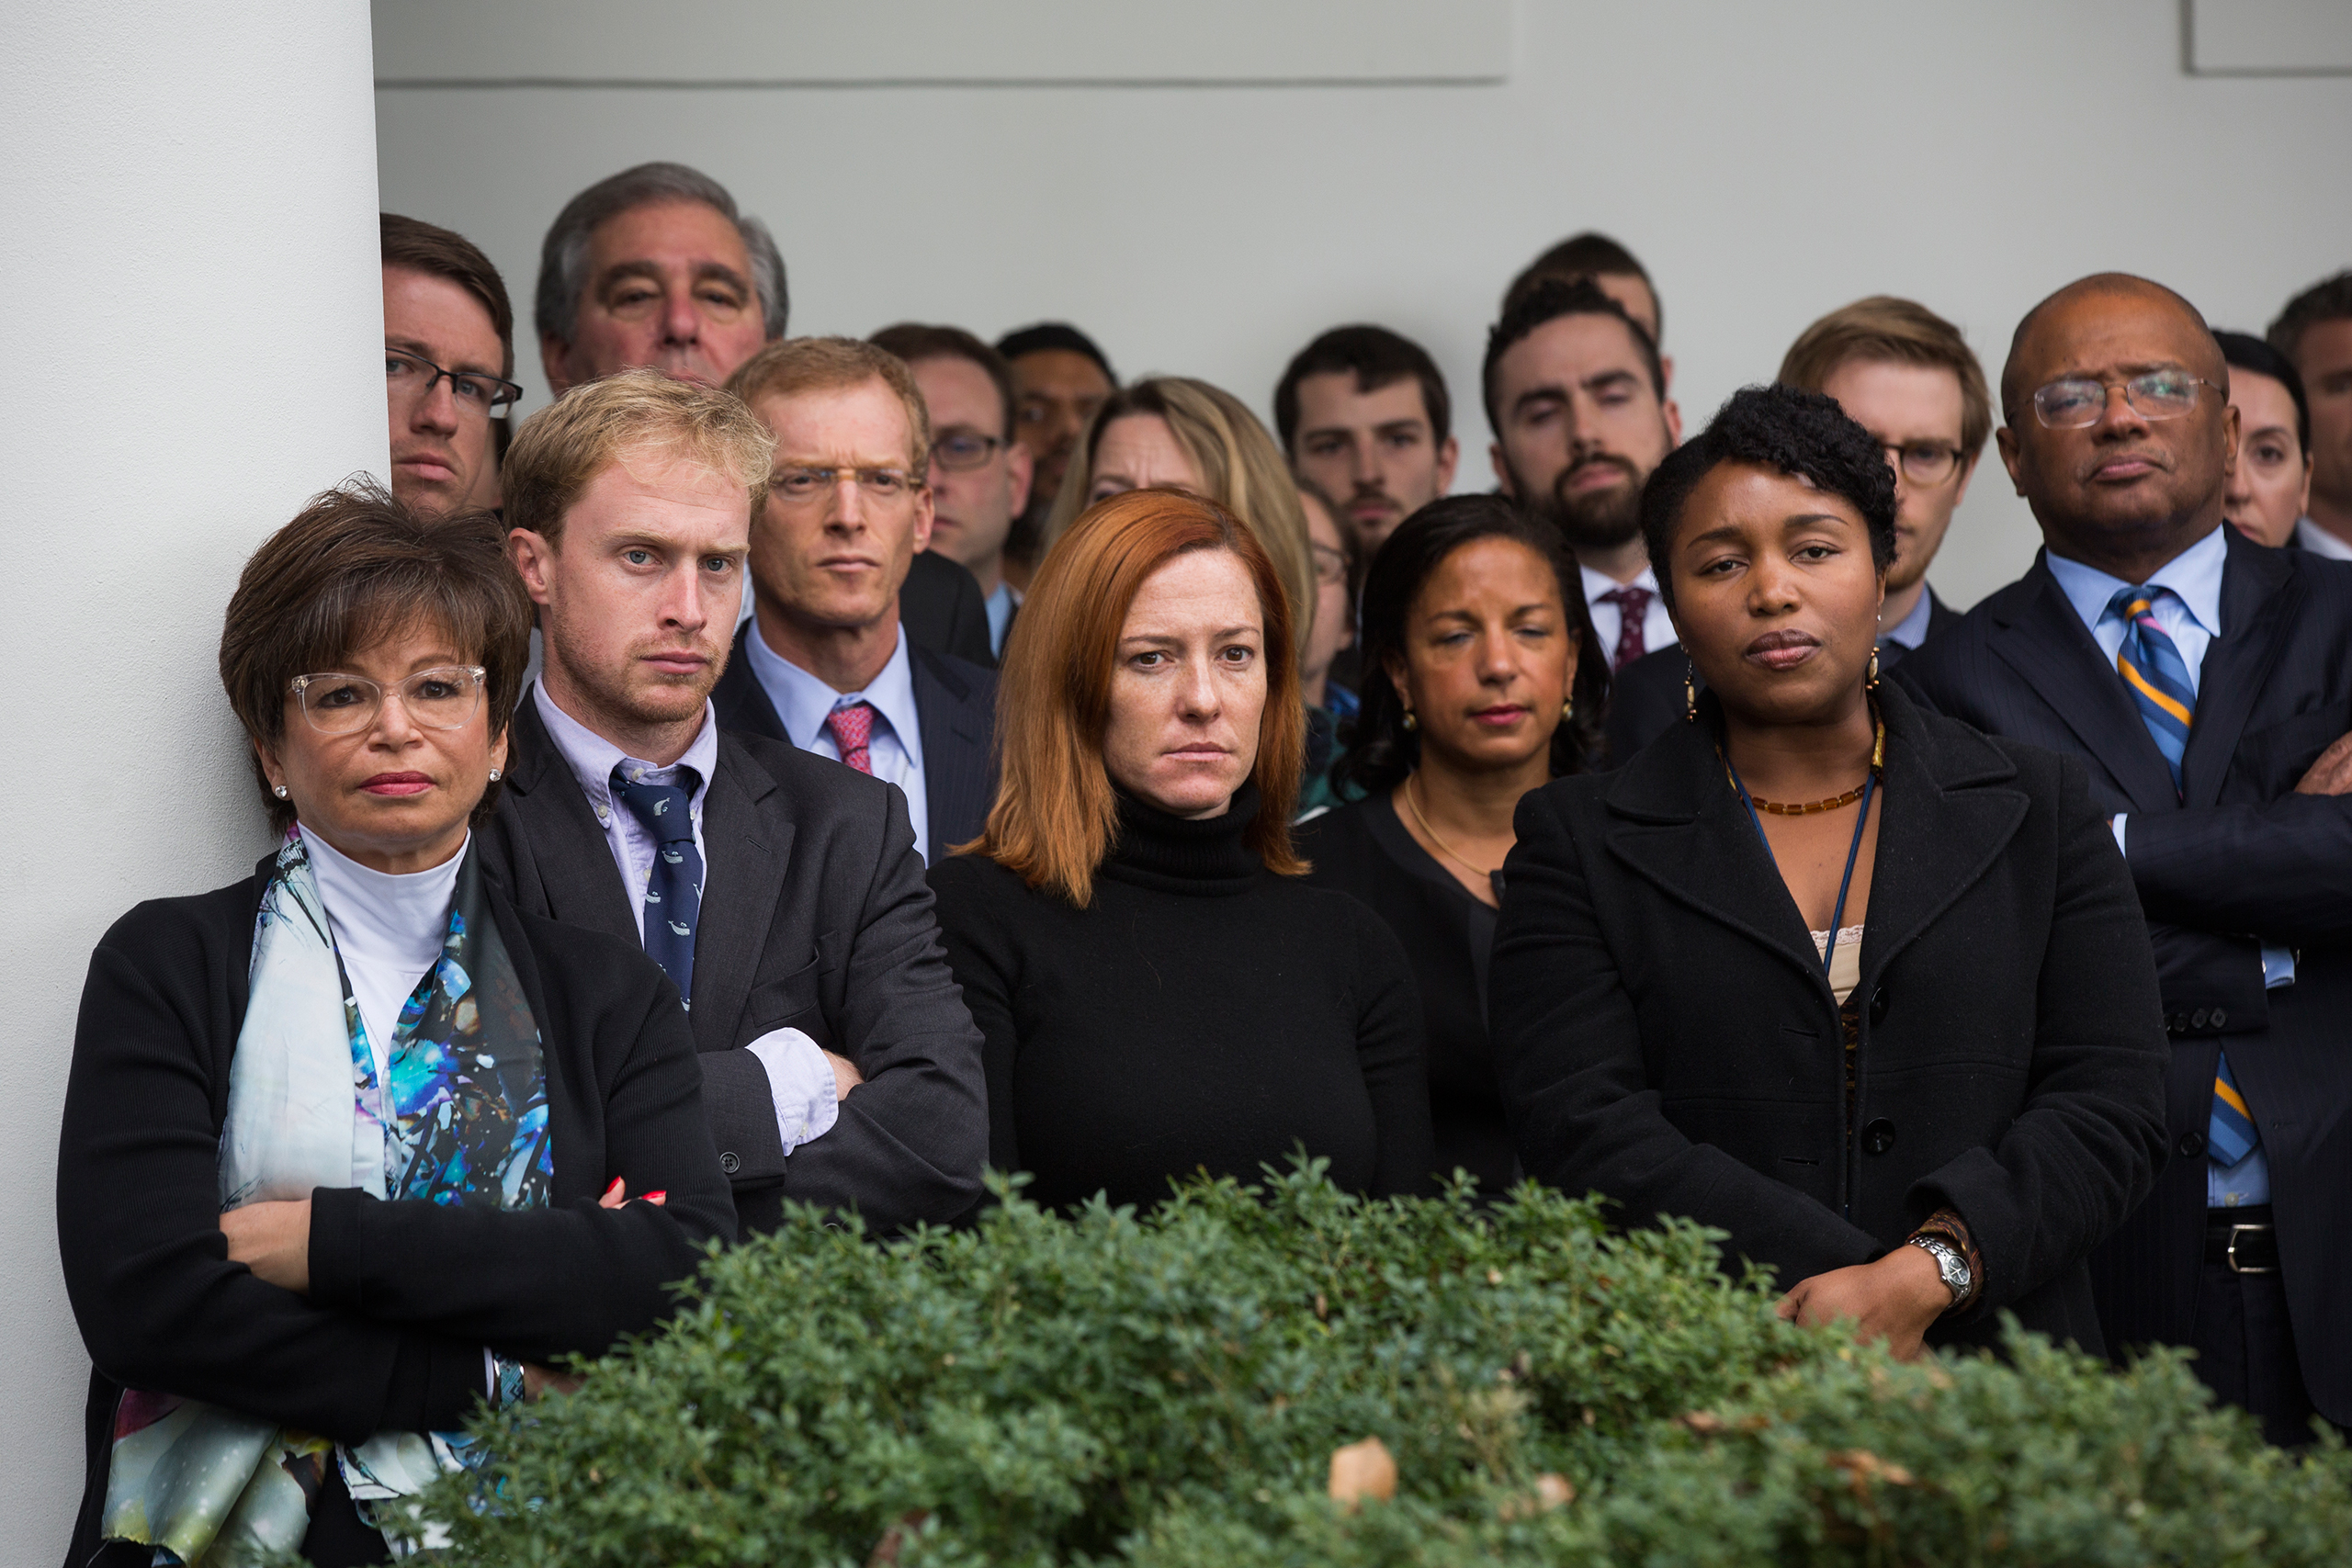 White House staff members listen to President Obama speak about Republican presidential nominee Donald Trump's victory over Democratic candidate Hillary Clinton for the presidency in the Rose Garden of the White House on Nov. 9. (Jim Lo Scalzo—EPA)